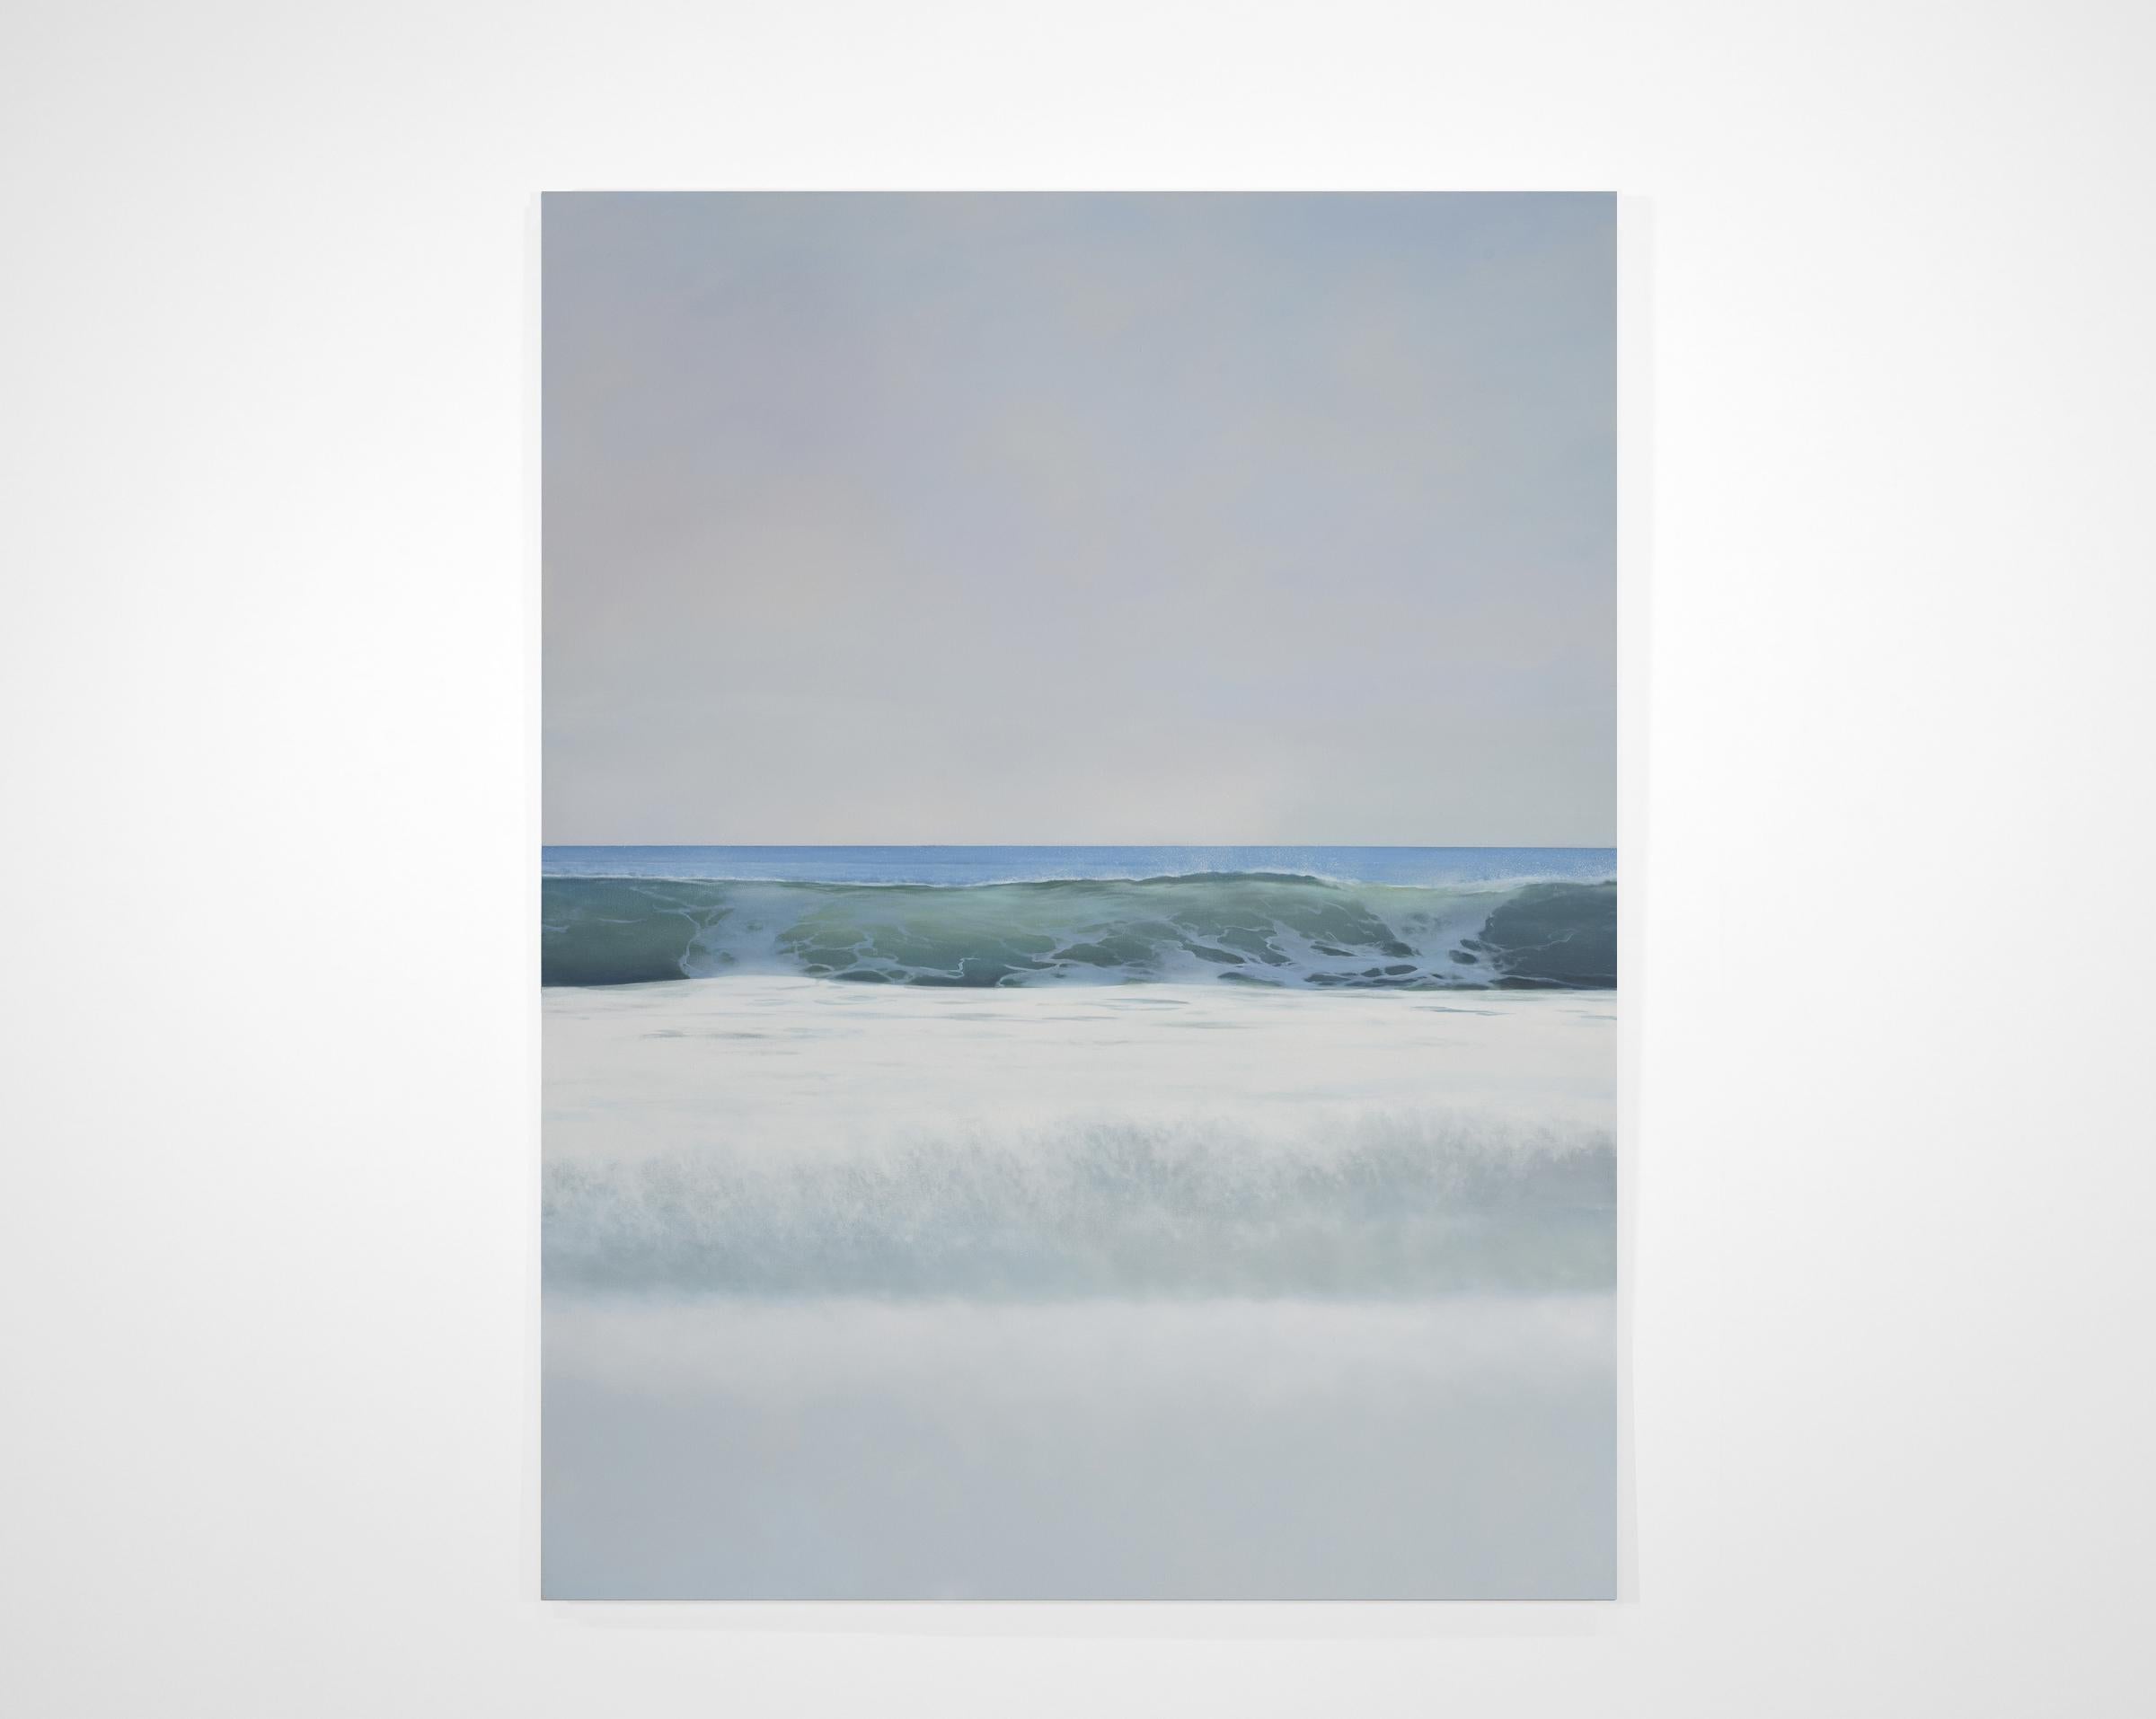 SUMMER WHITES, ocean shoreline, waterscape, shades of white, blue, waves, malibu - Painting by Todd Kenyon